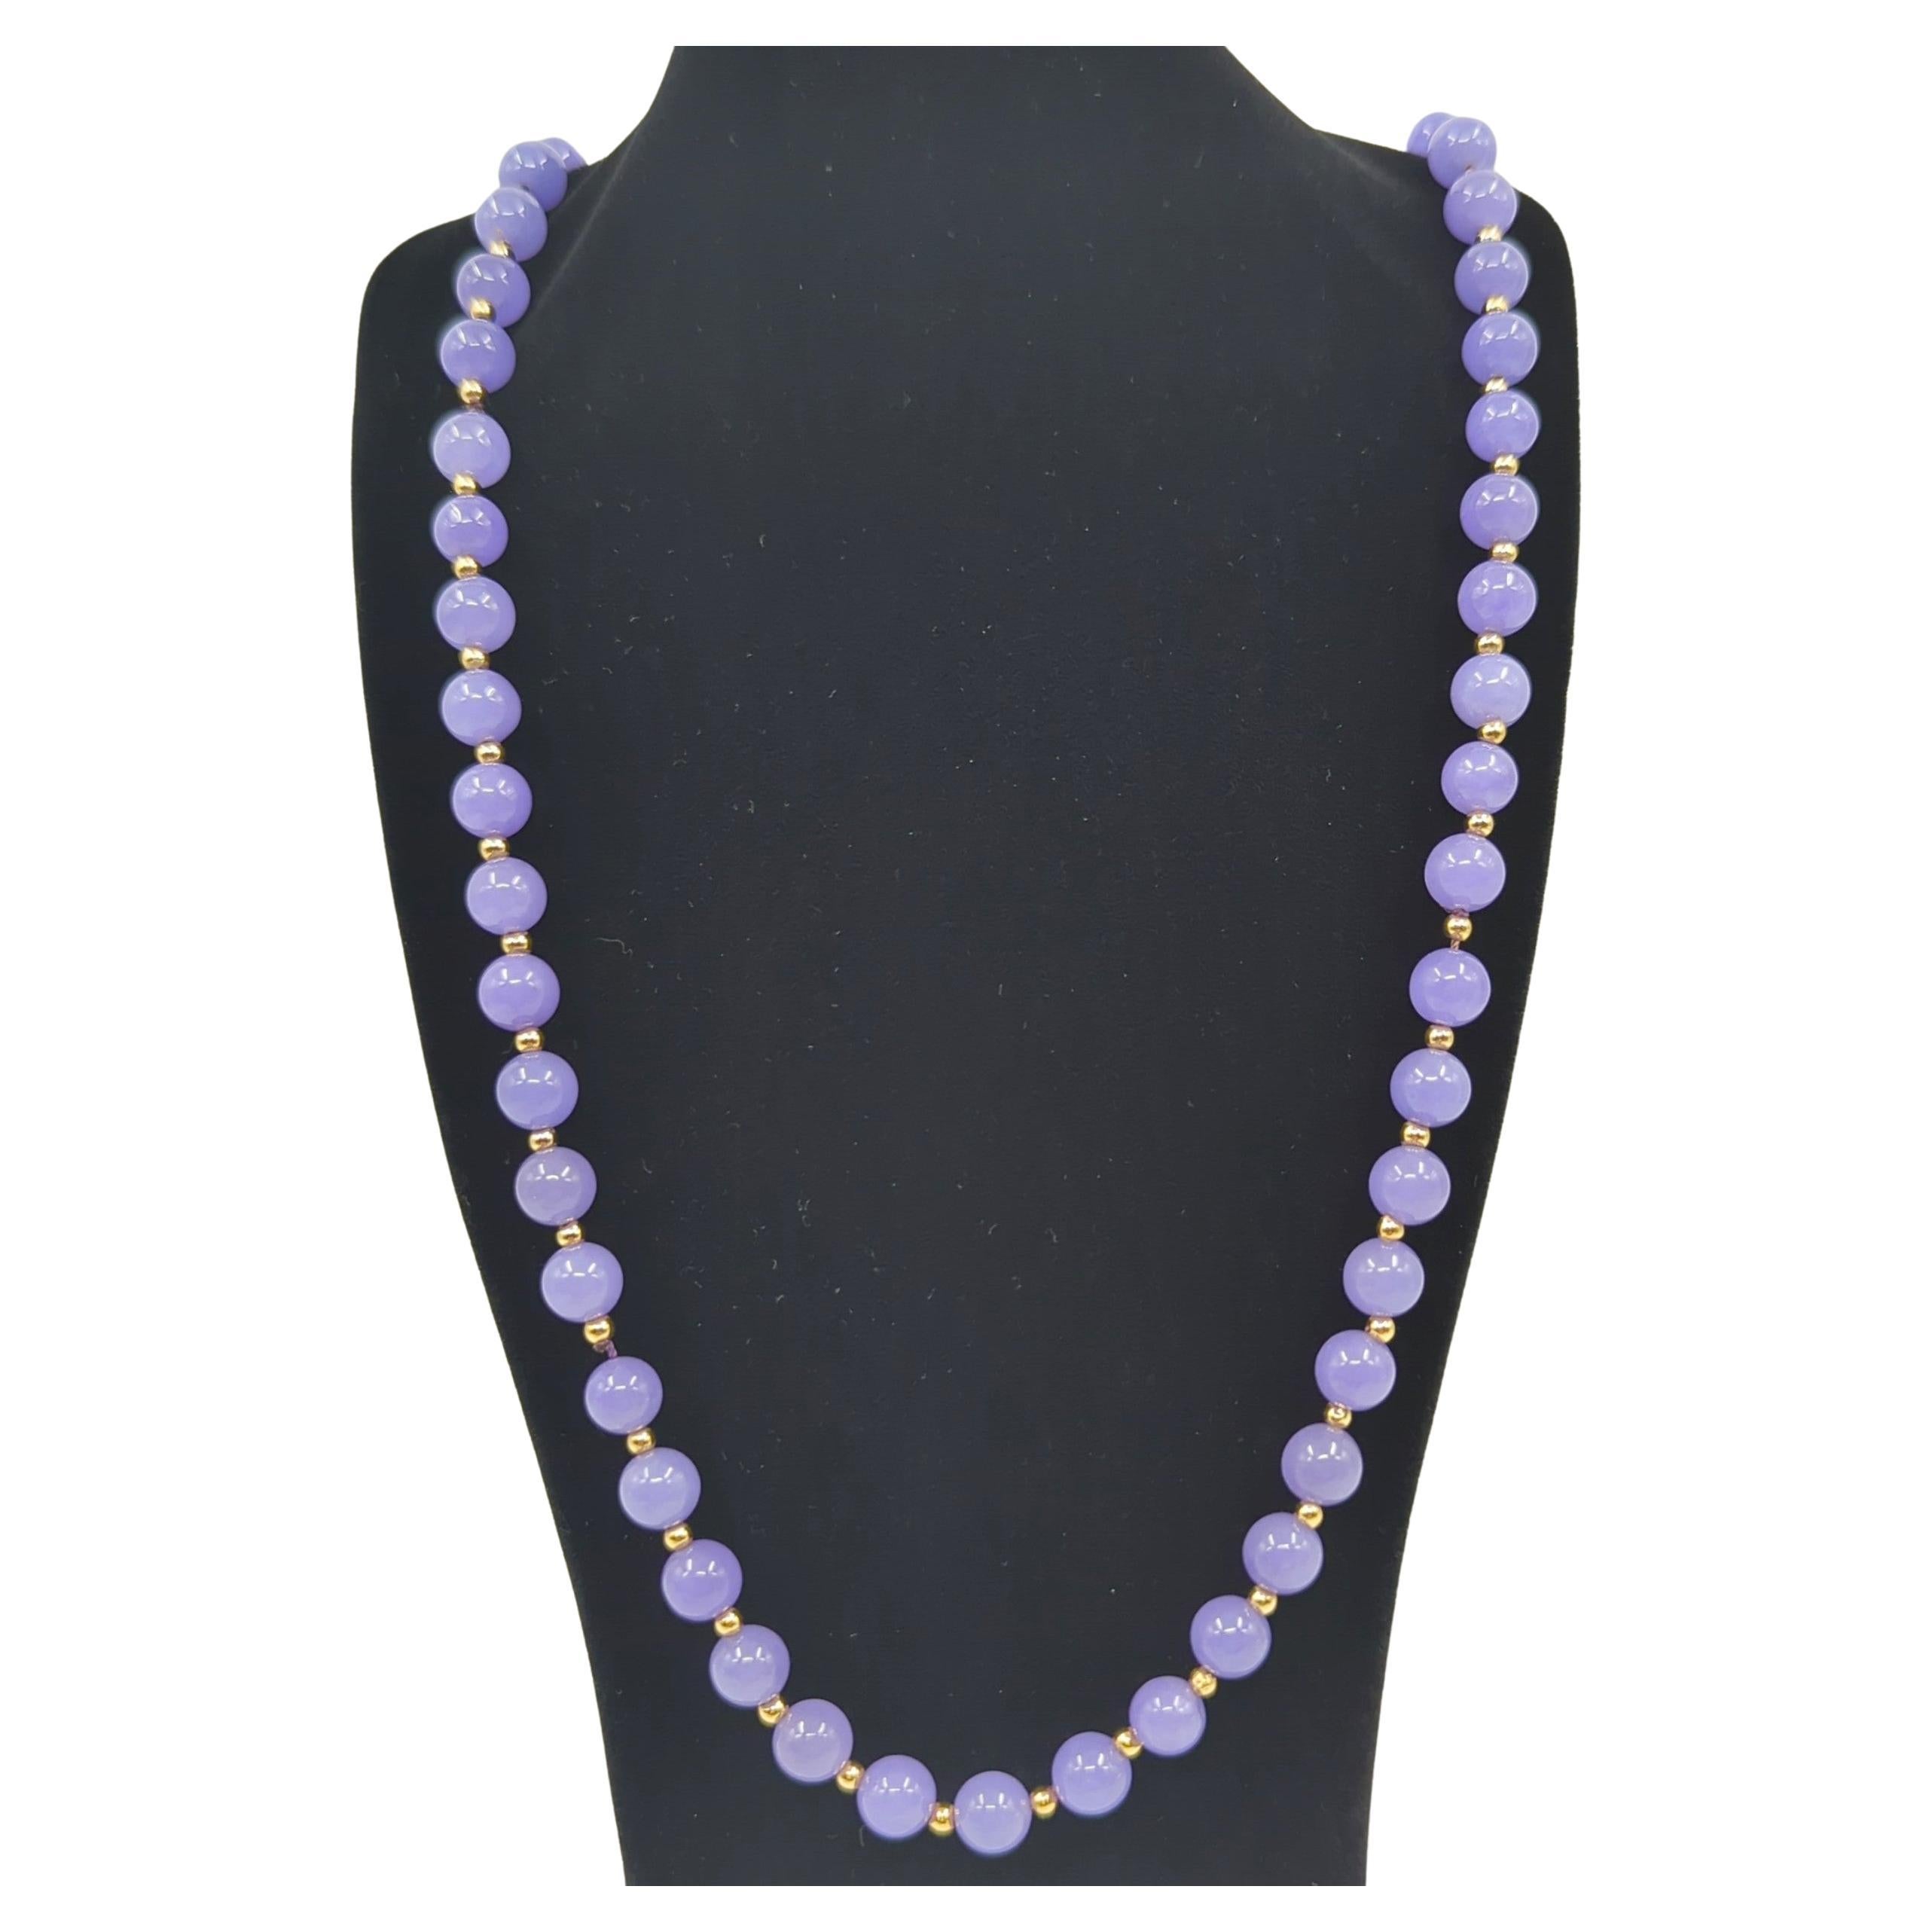 This vintage Chinese natural lavender jadeite beaded necklace is a striking piece of jewelry that showcases the exquisite beauty and rarity of lavender jadeite. The jadeite beads exhibit an intense bluish-purple lavender color, a hue that is both